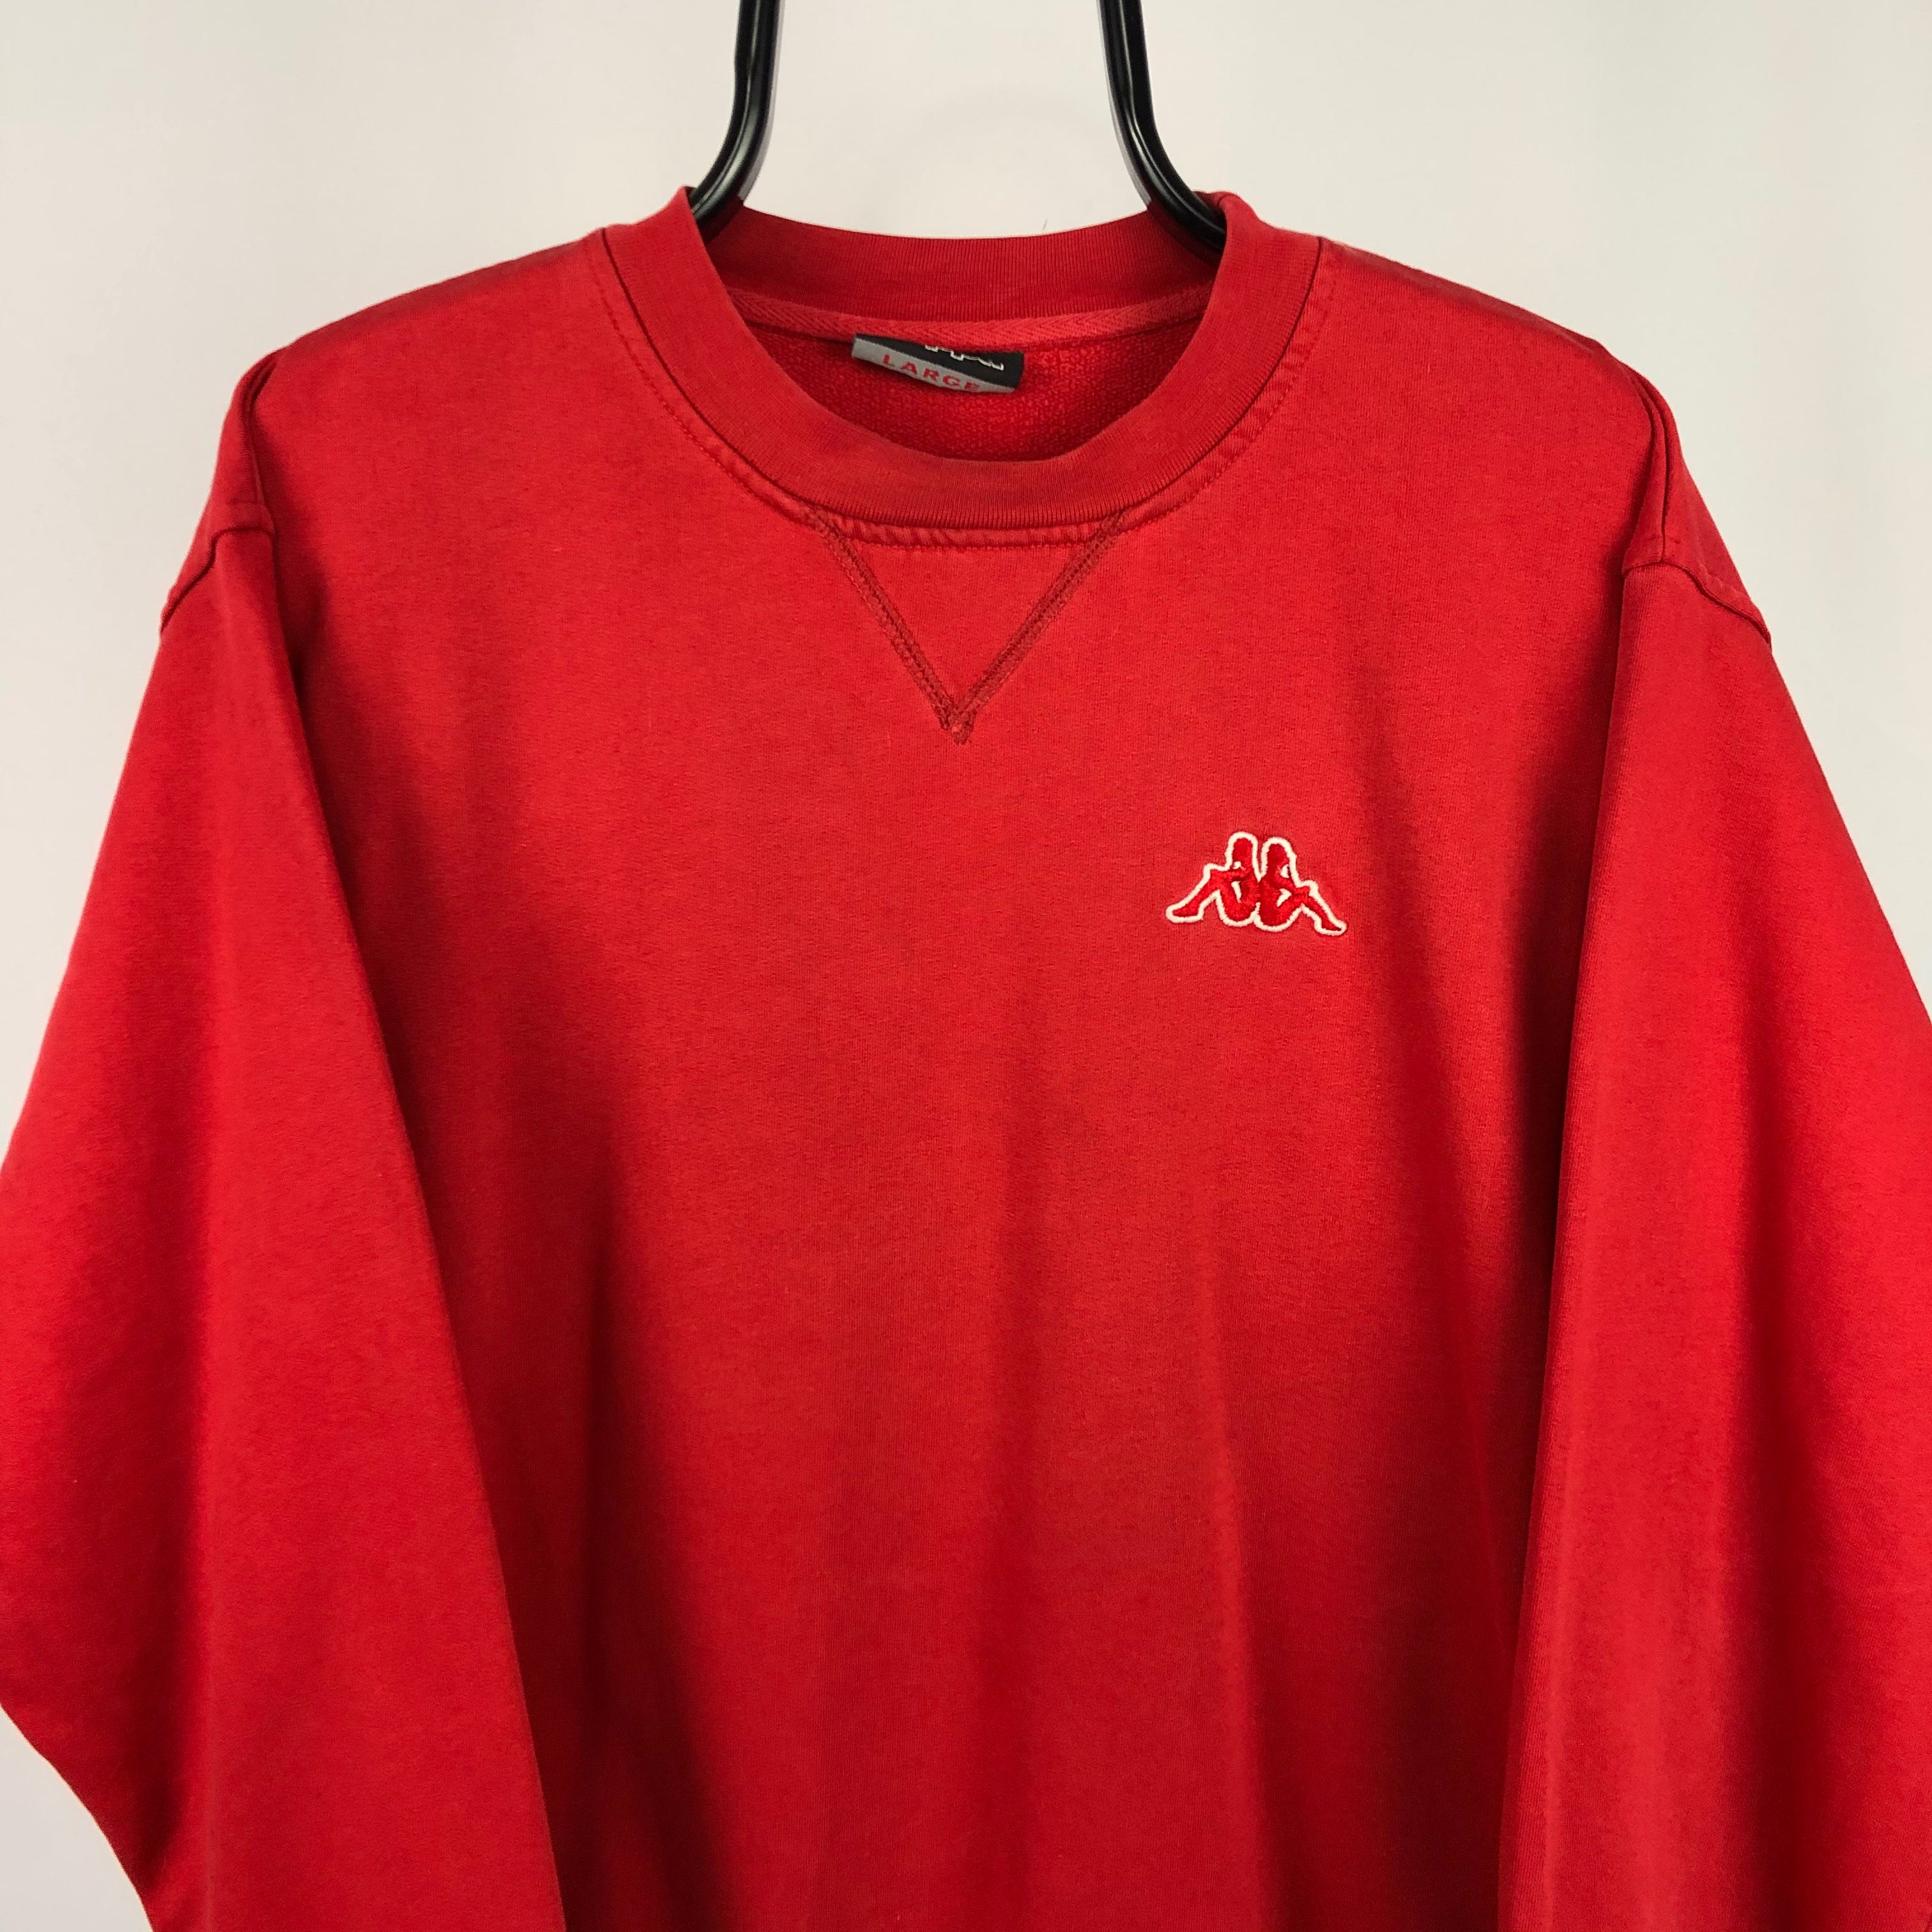 Vintage Kappa Embroidered Small Logo Sweatshirt in Red - Men's Large/W ...